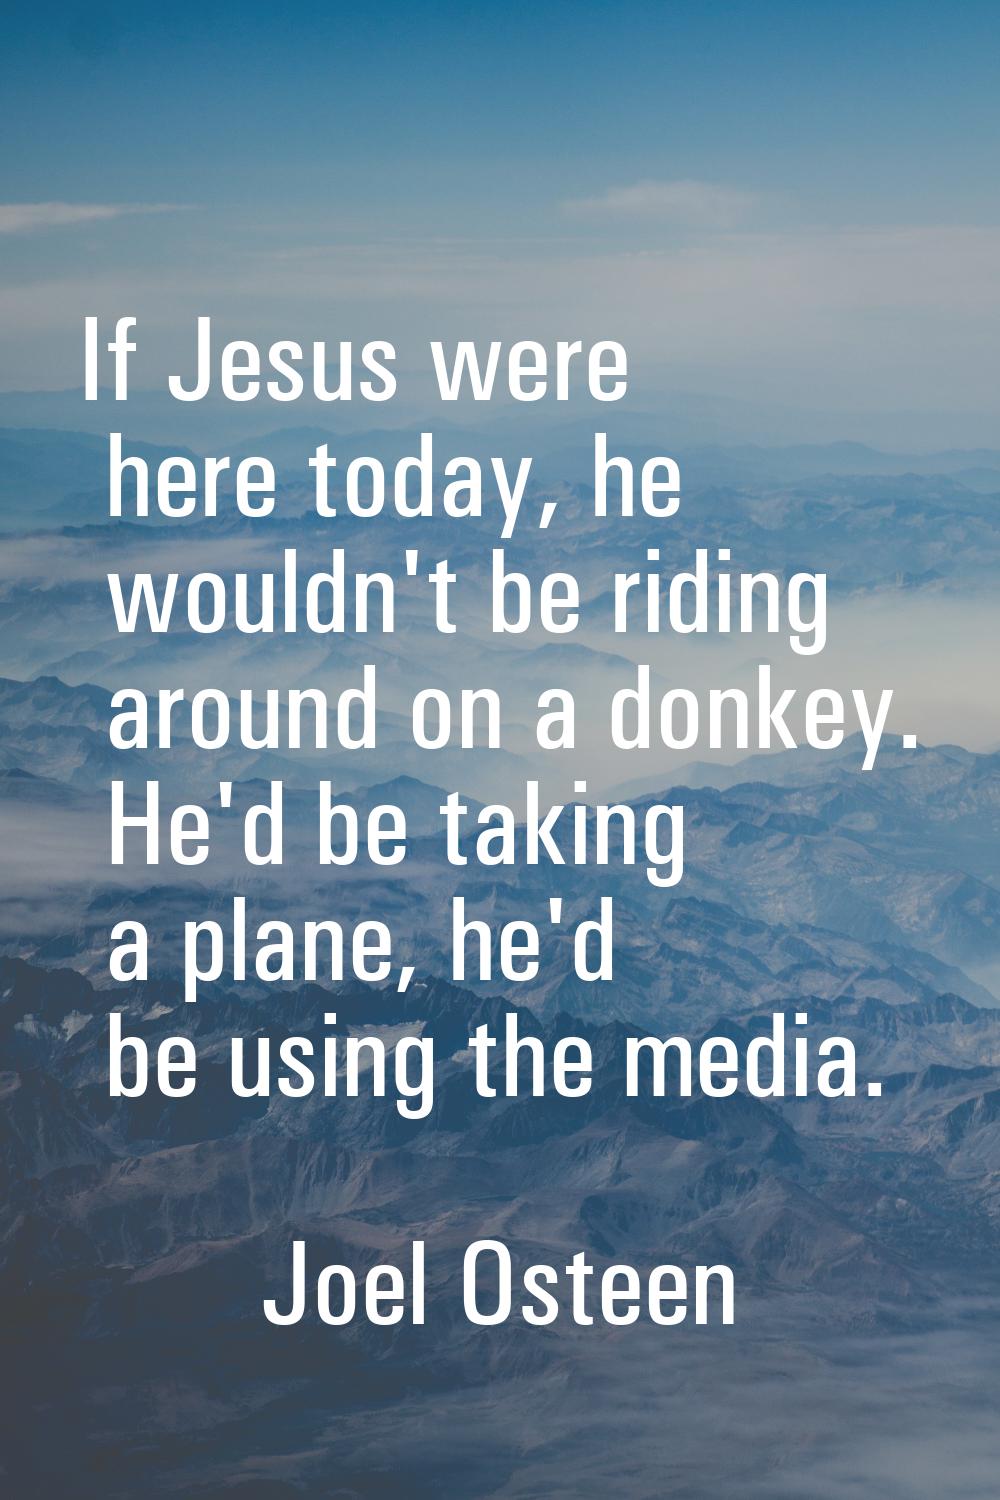 If Jesus were here today, he wouldn't be riding around on a donkey. He'd be taking a plane, he'd be